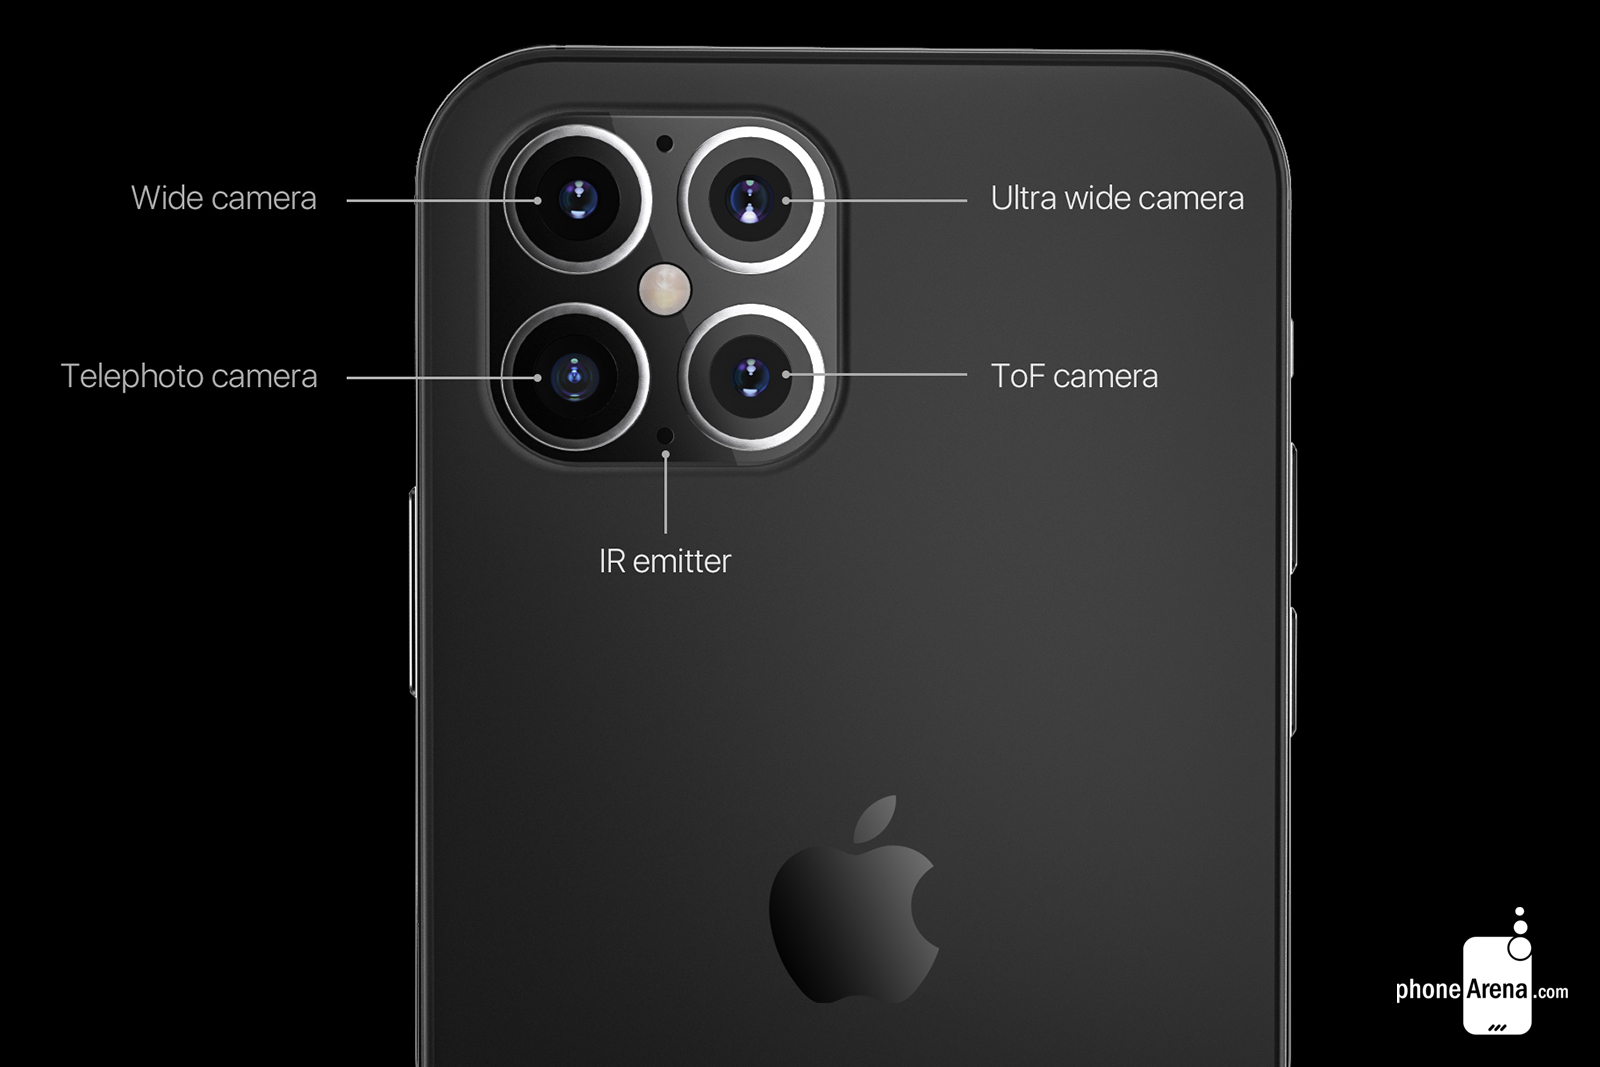 What kind of cameras will the Apple iPhone 12 have?